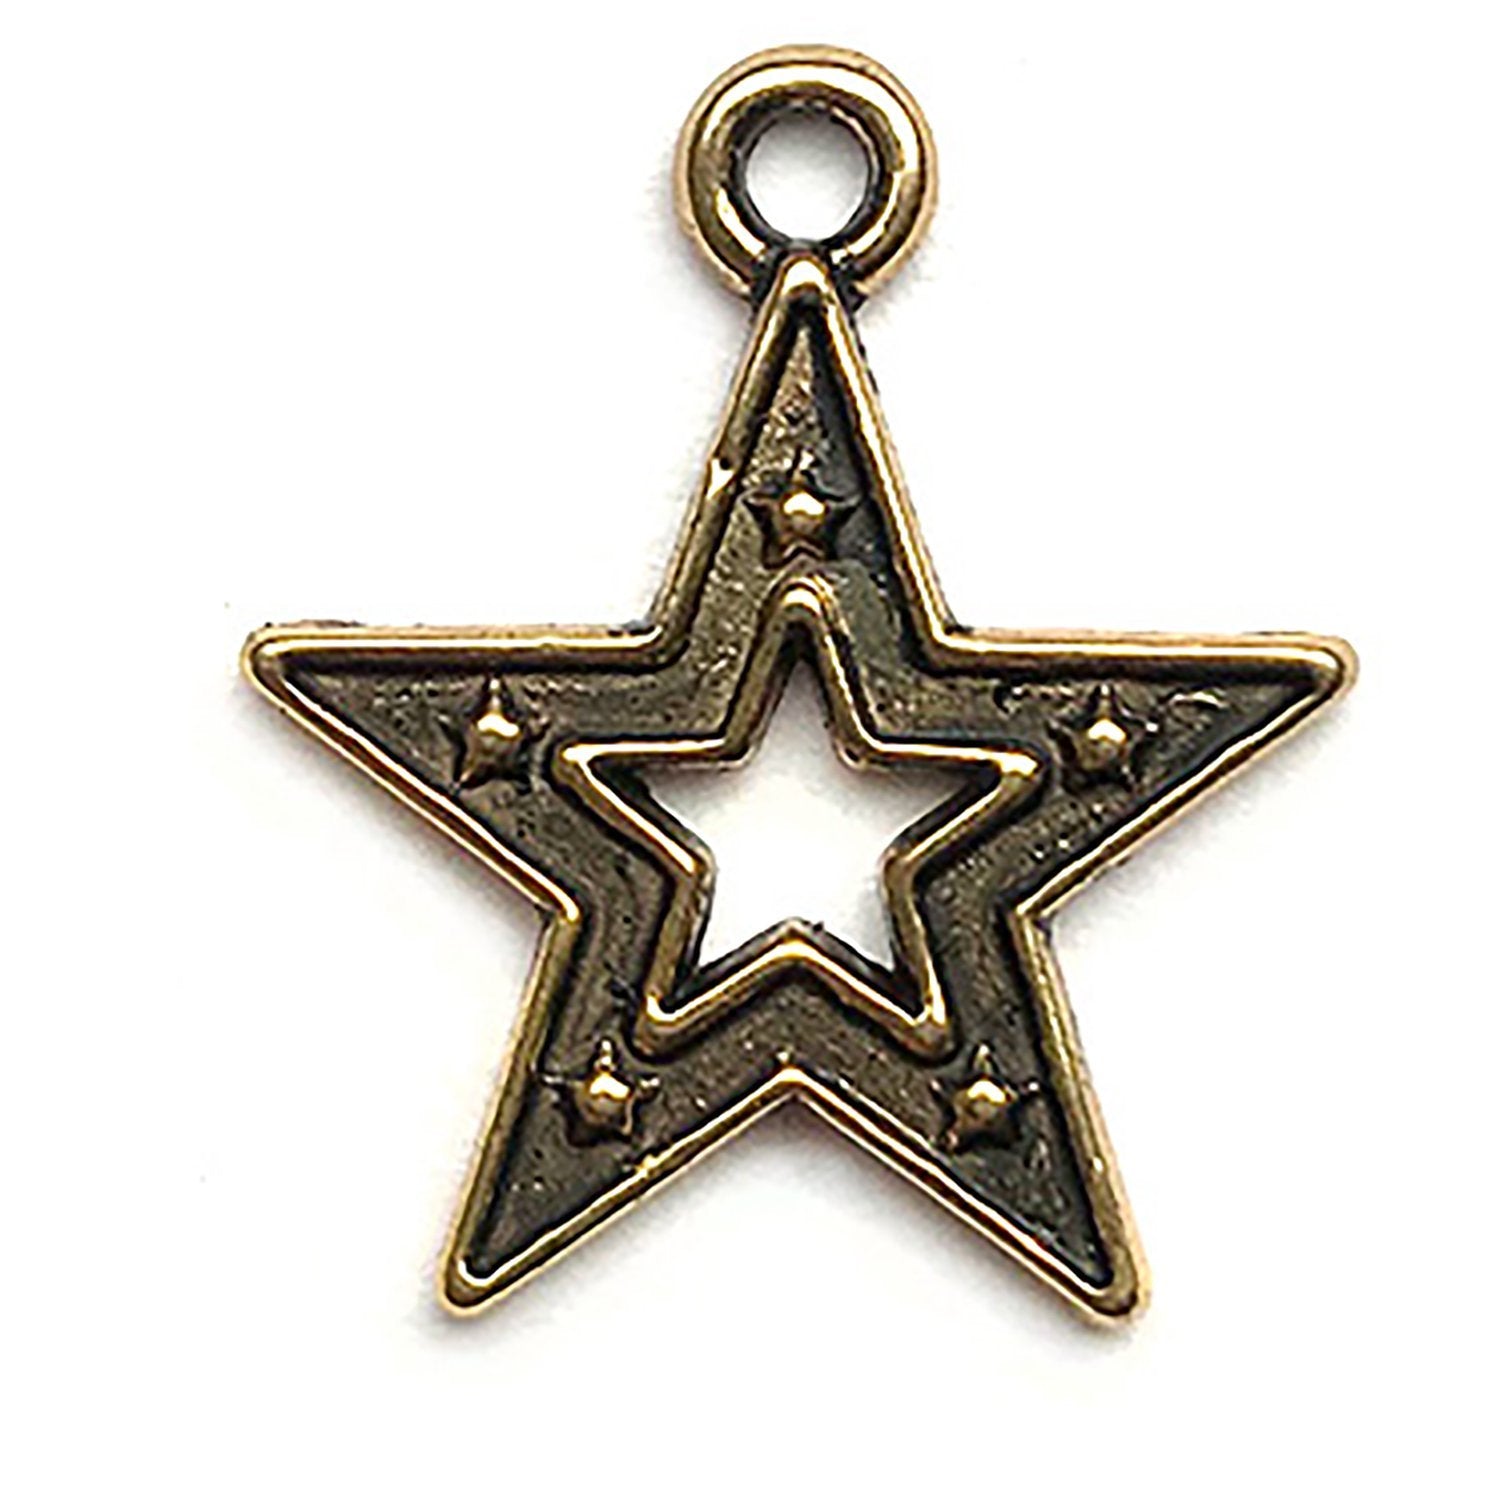 Star Charm - Buttons Galore and More